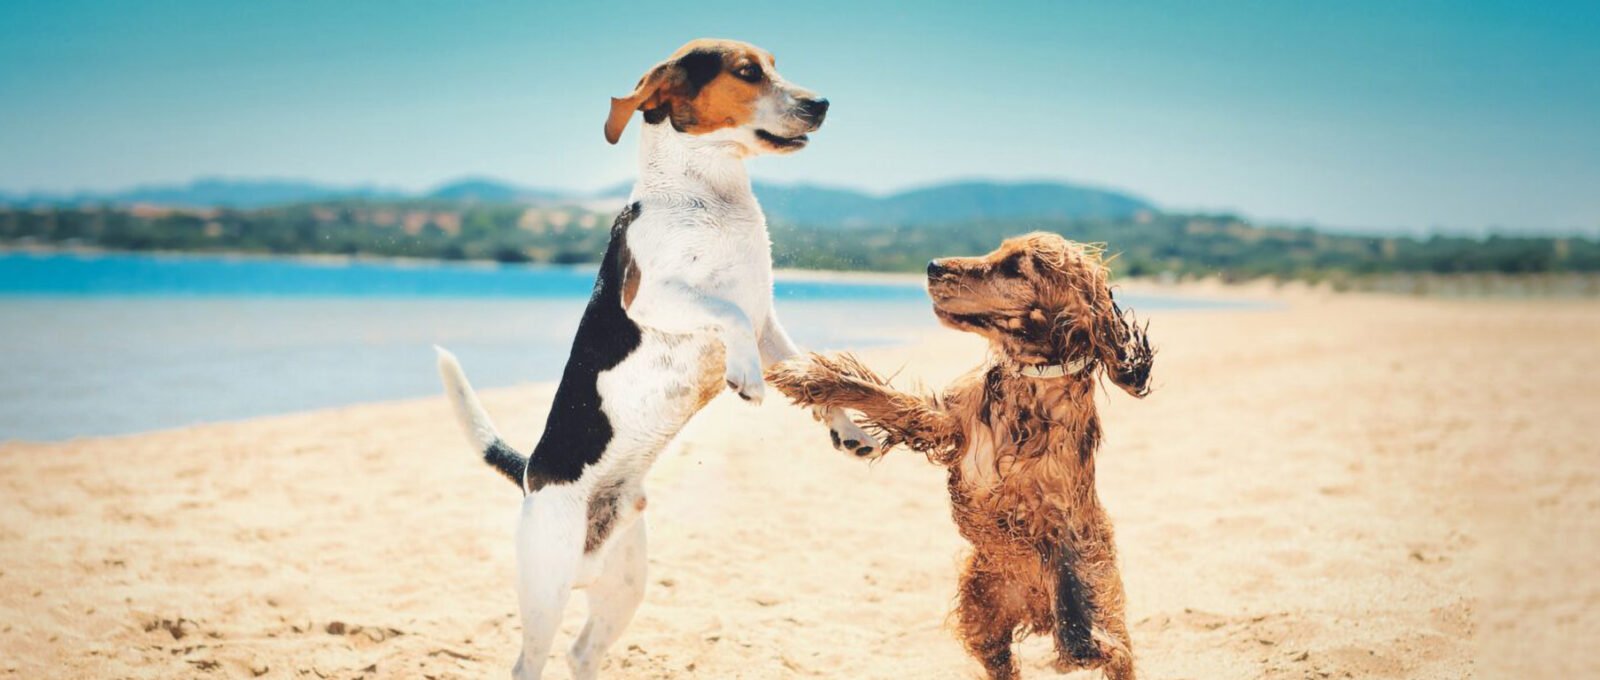 Beautiful shot of two dogs standing upright and dancing together on a beach